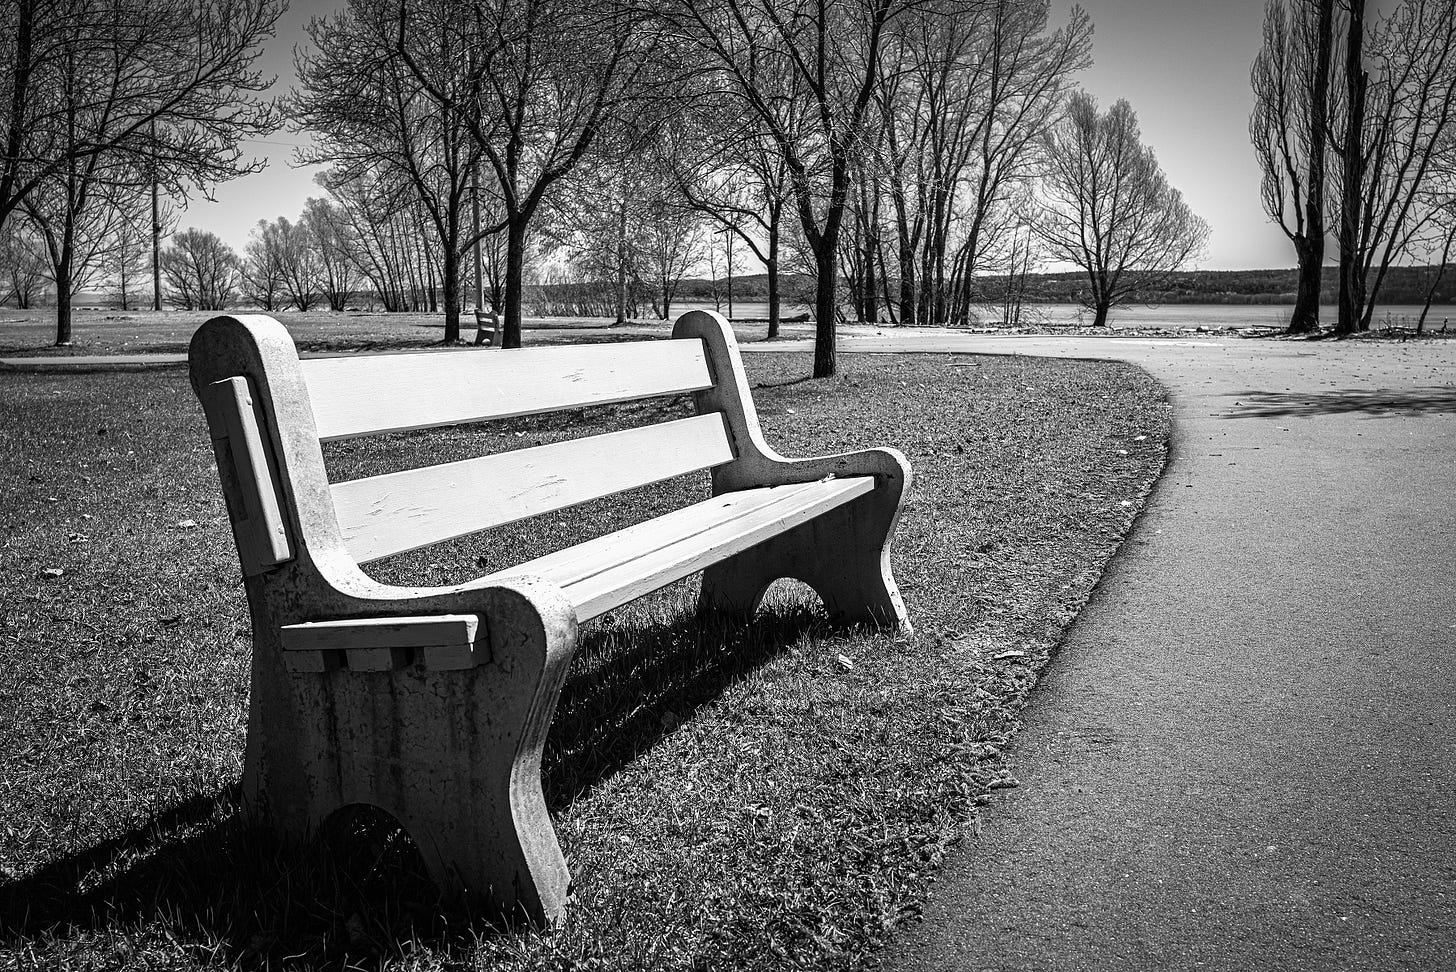 Black and white photograph of an empty park bench near a paved pathway in early spring